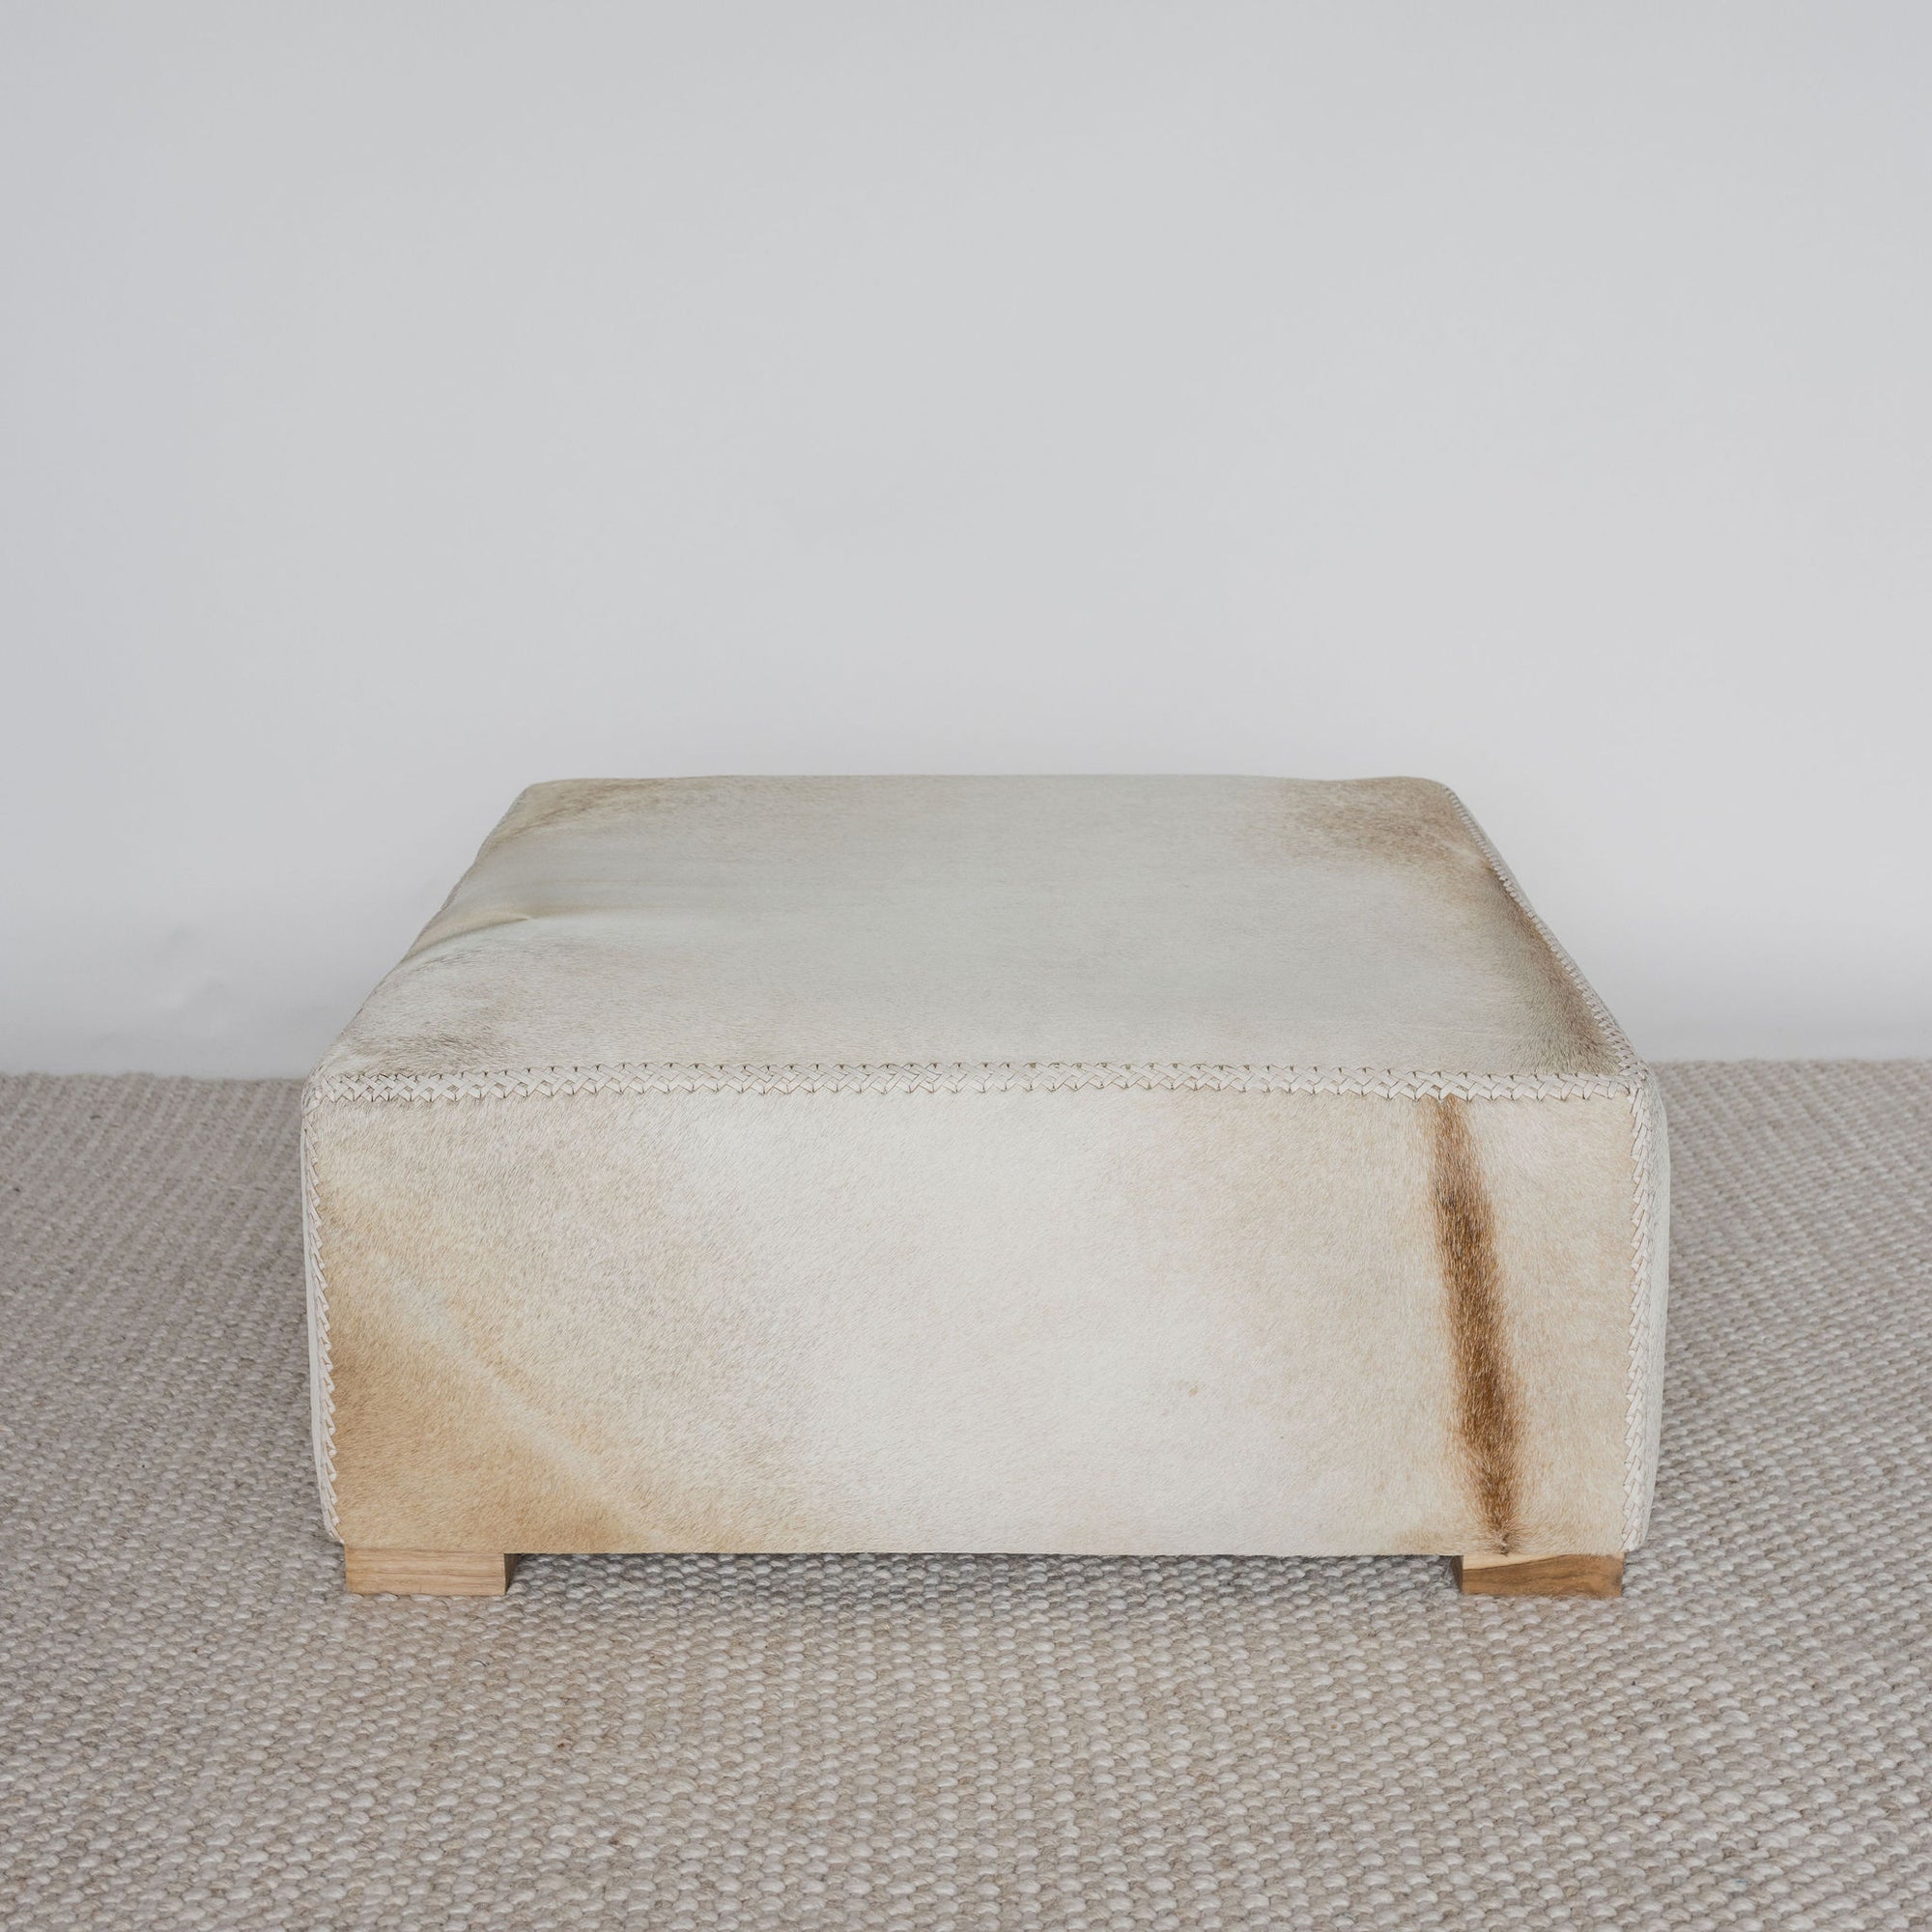 light colored square hair on hide ottoman coffee table with small teak wood feet and distinctive caramel natural marking on one side